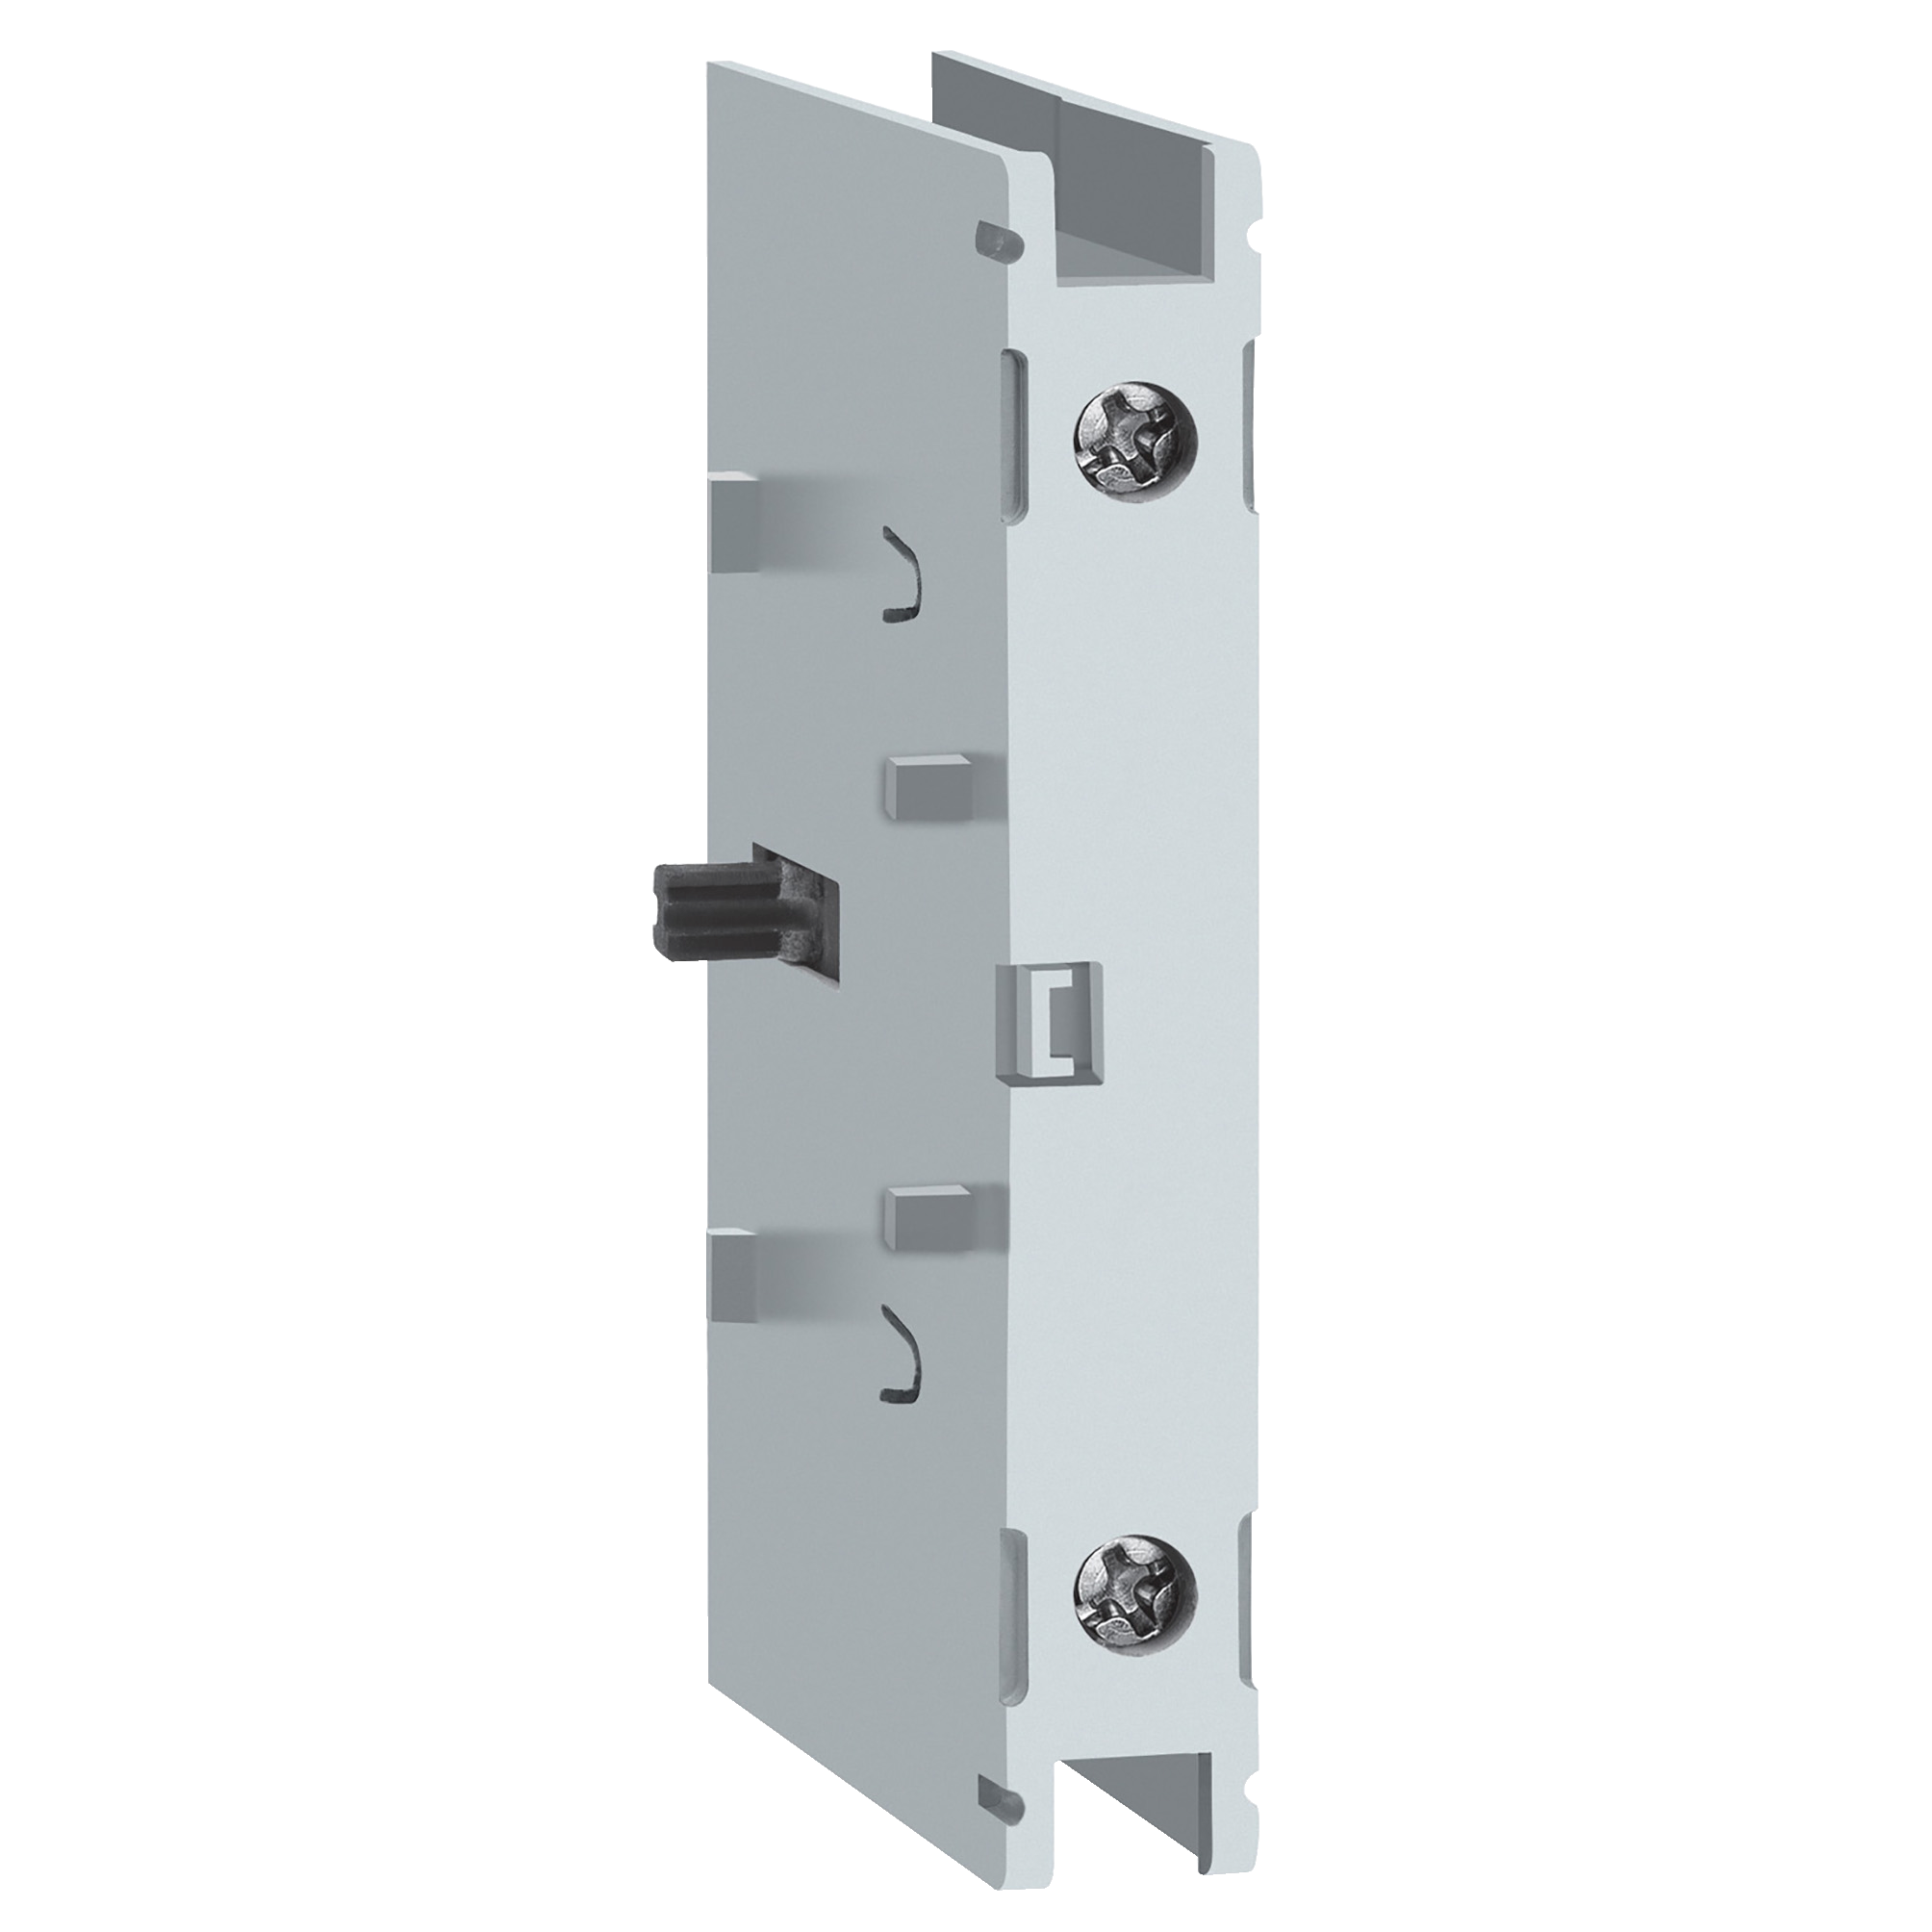 Disconnect switch, TeSys VLS, additional pole, 125A, for 125A switch, size 2, DIN rail